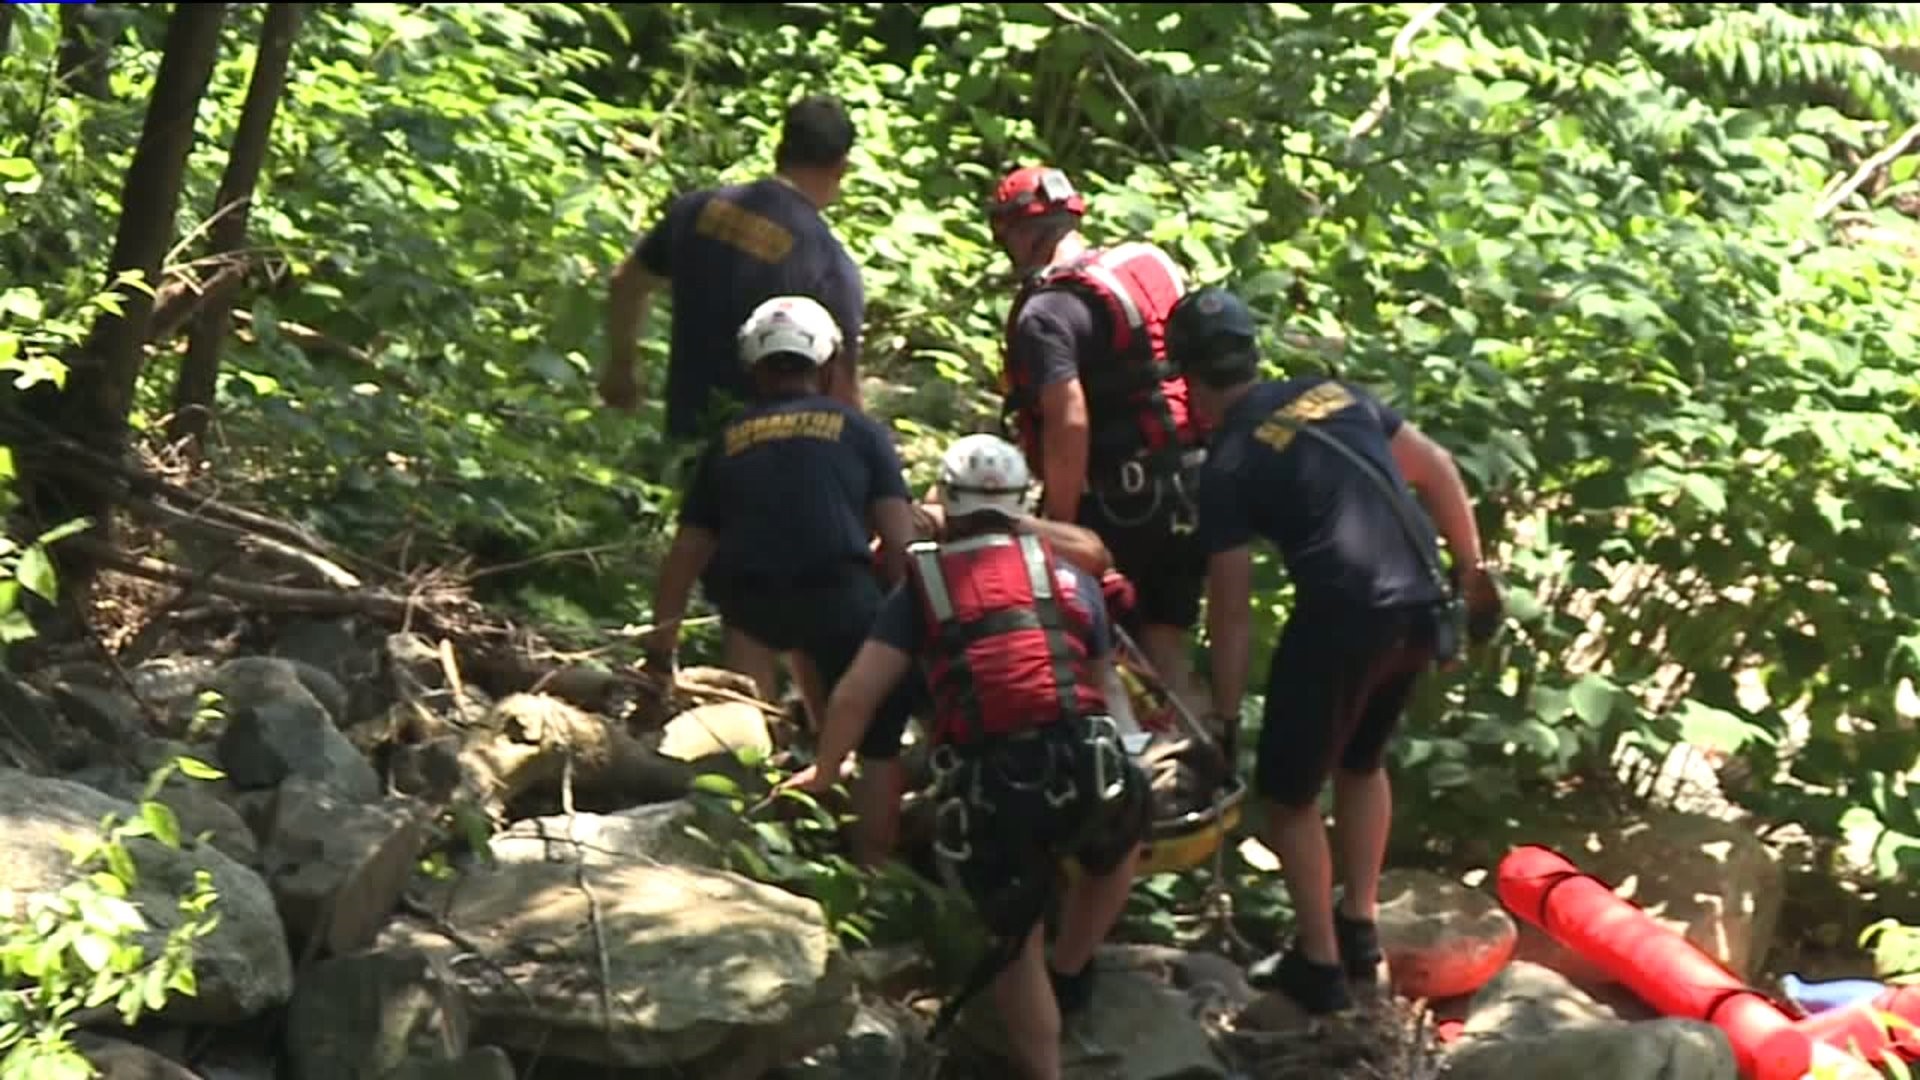 Crews Rescue Man from Nay Aug Gorge